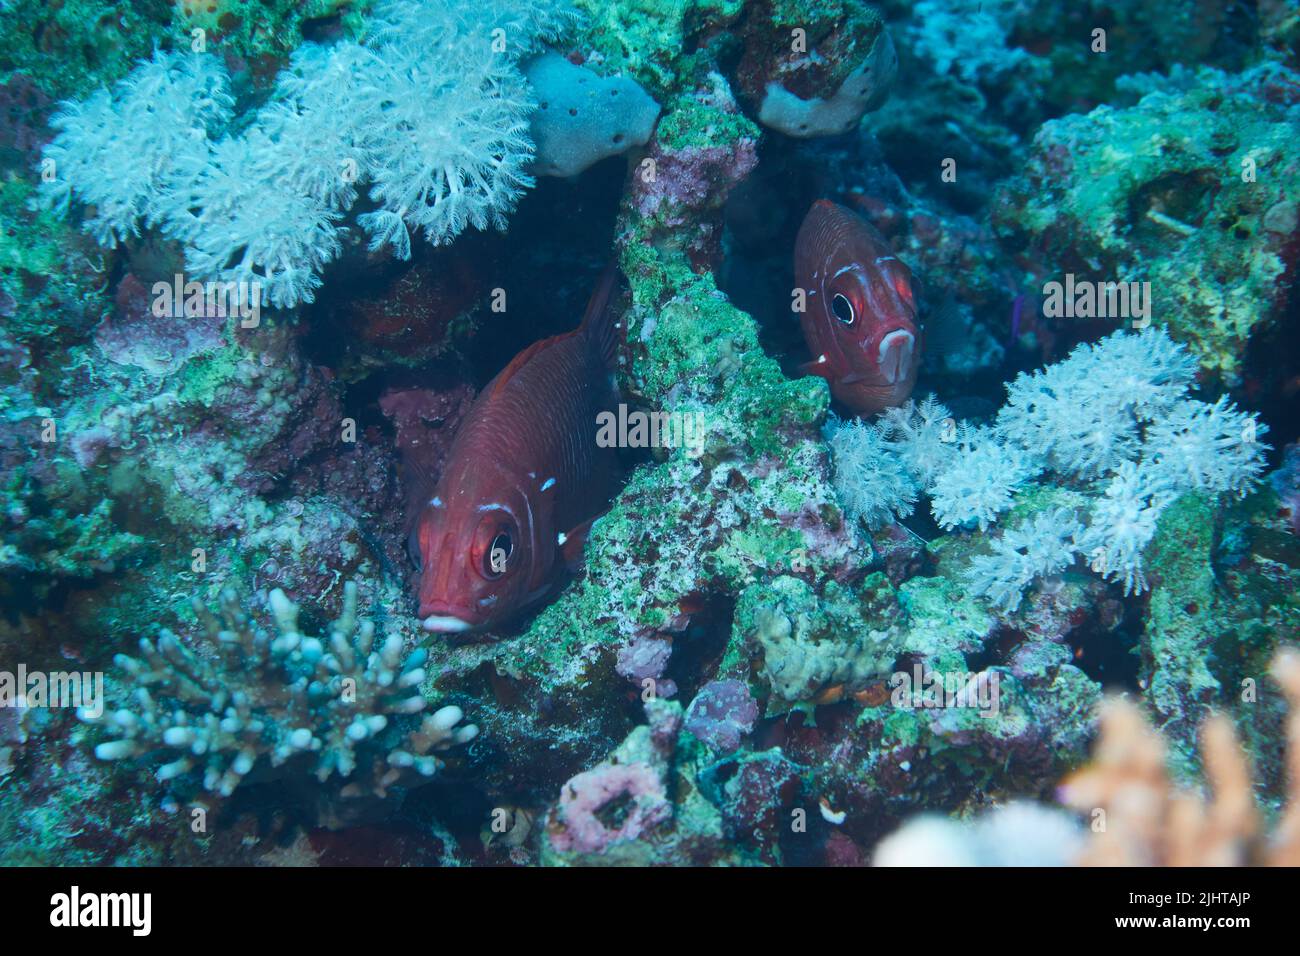 A closeup of cute Soldierfish hiding inside a coral Stock Photo